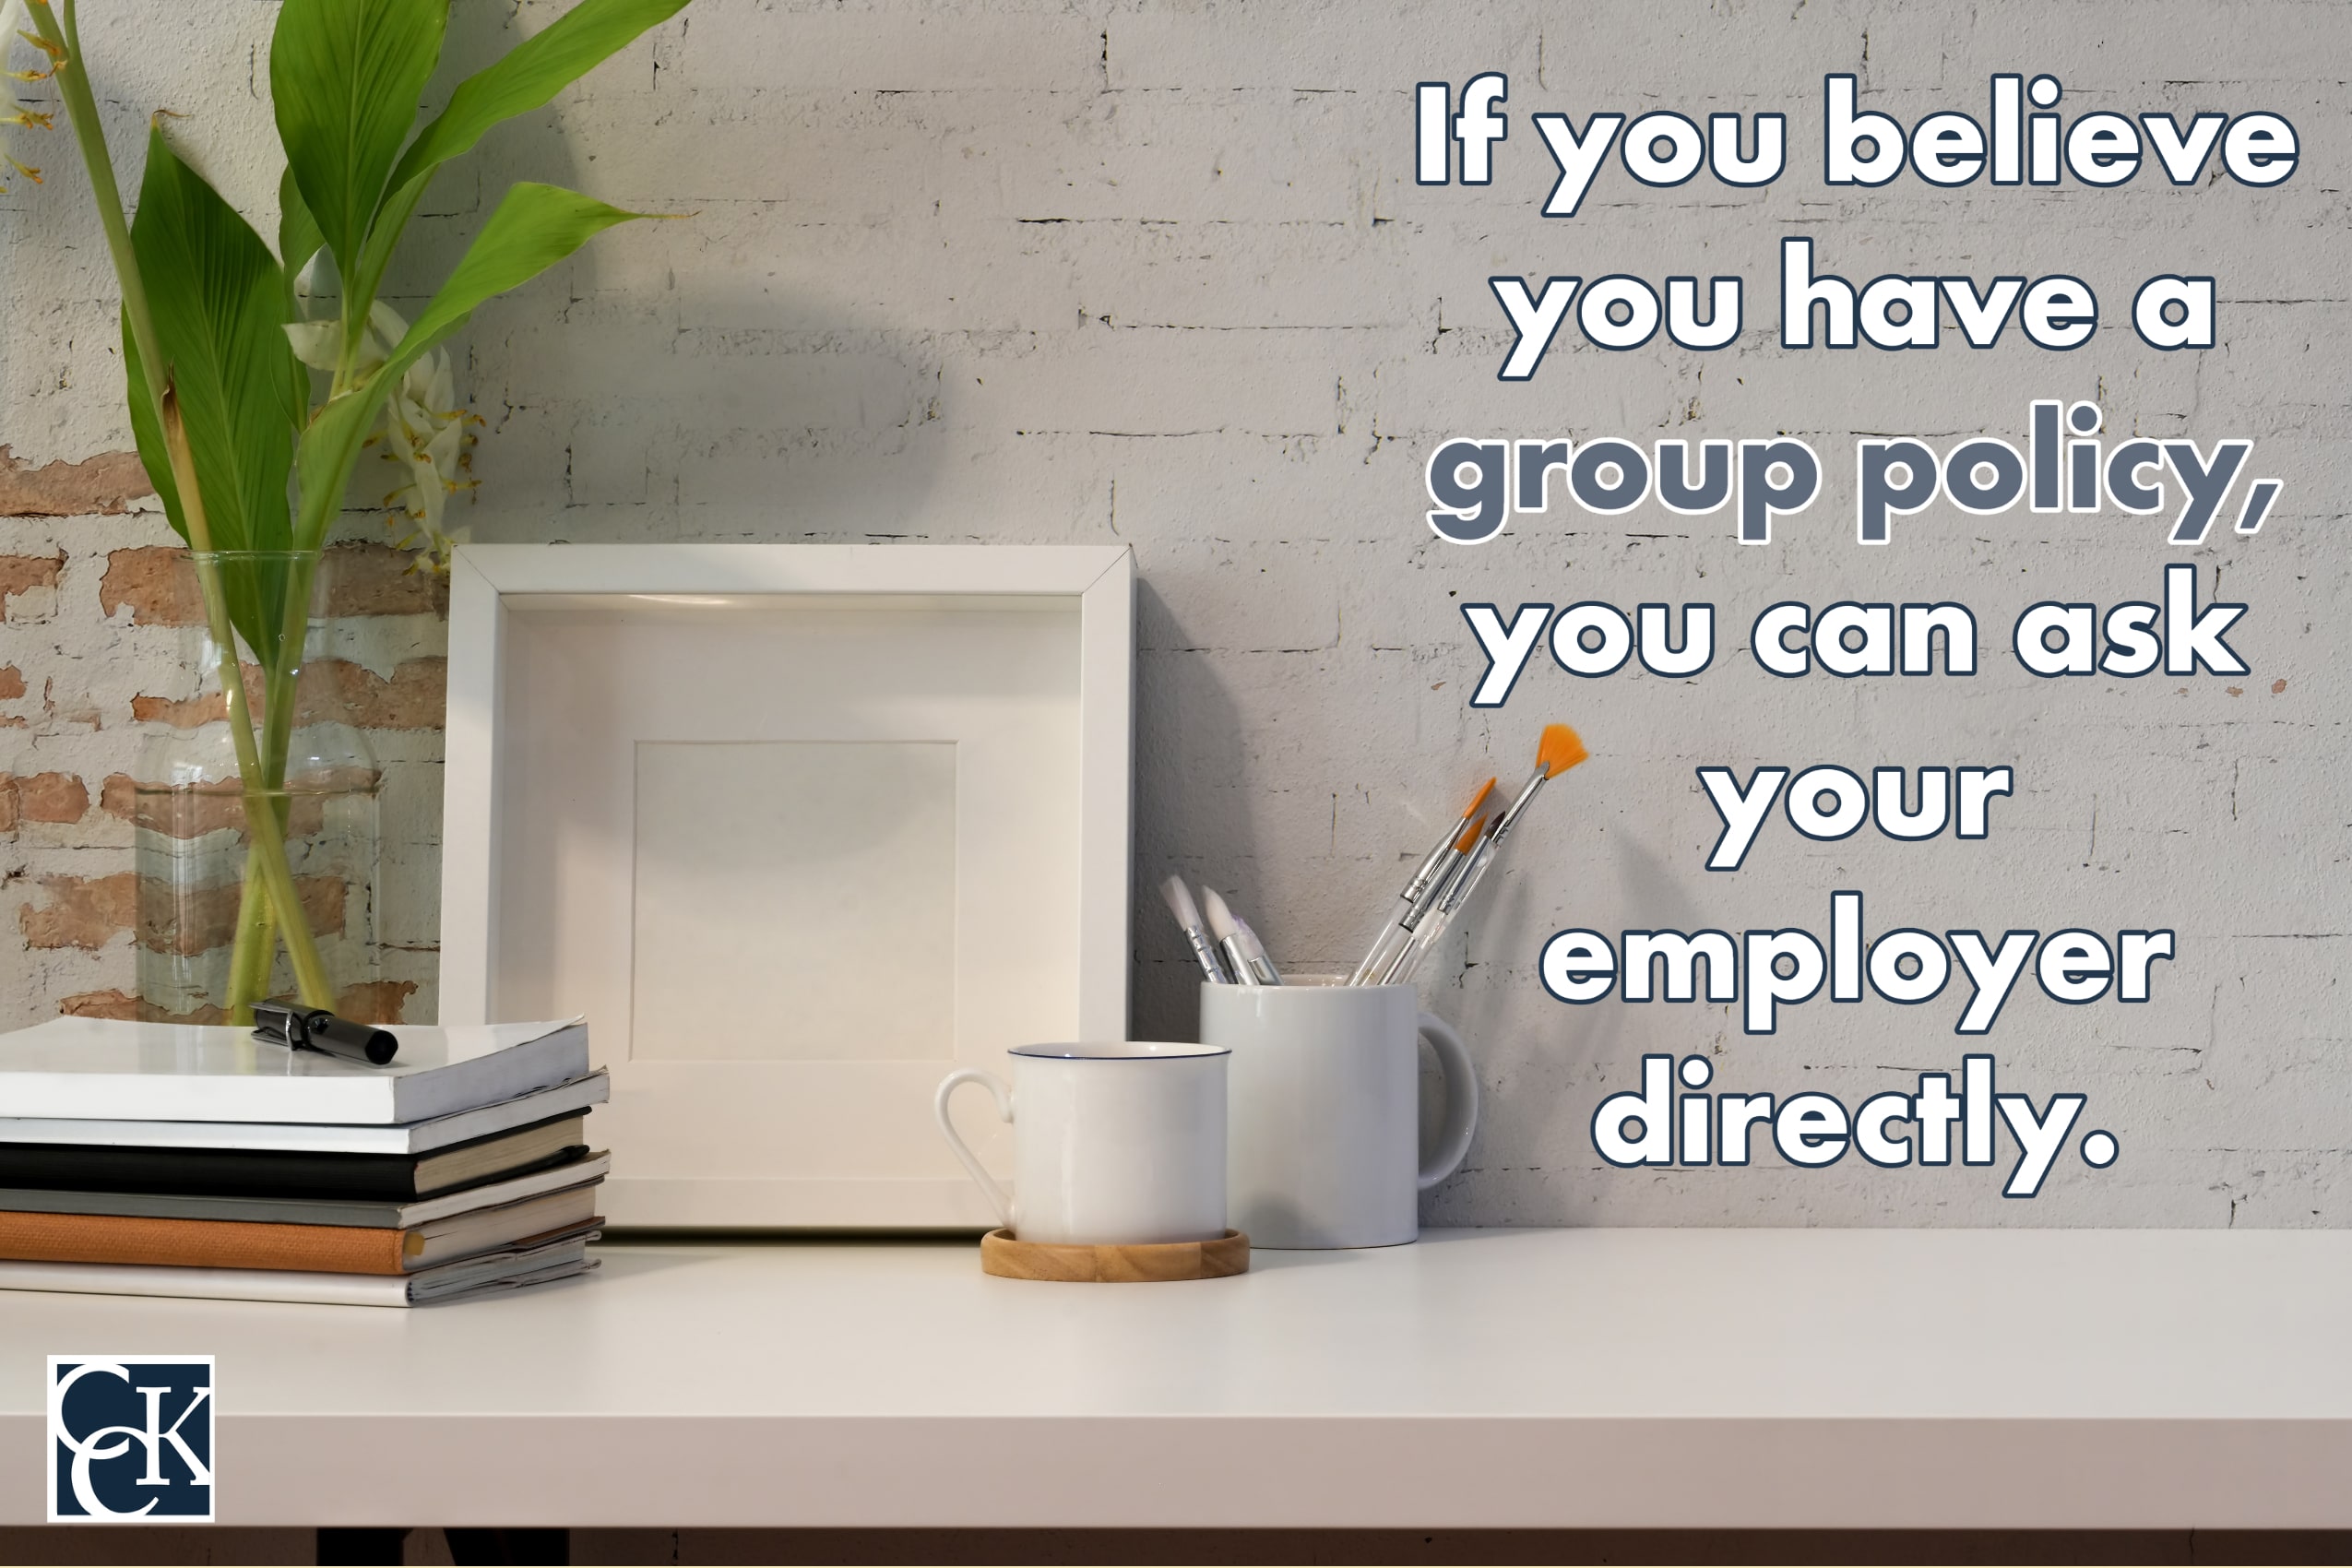 If you believe you have a group policy, you can ask your employer directly. 